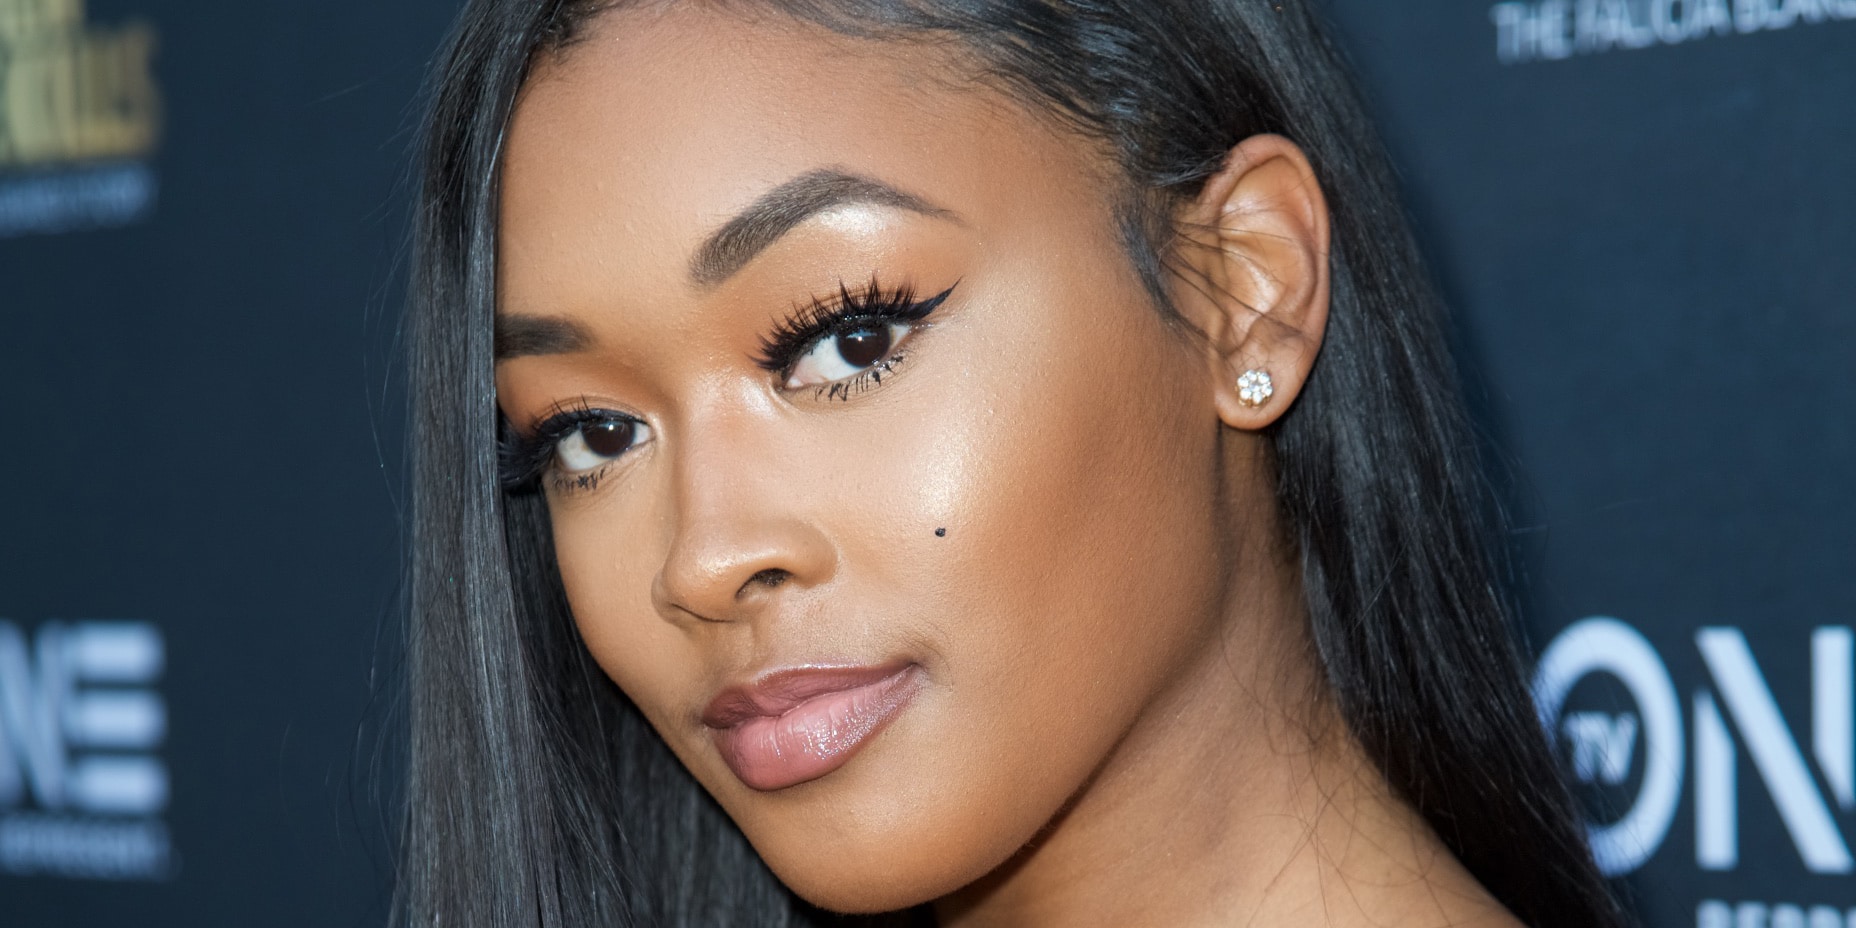 Miracle Watts Blonde Hair: 10 Stunning Photos of the Model's Iconic Look - wide 2